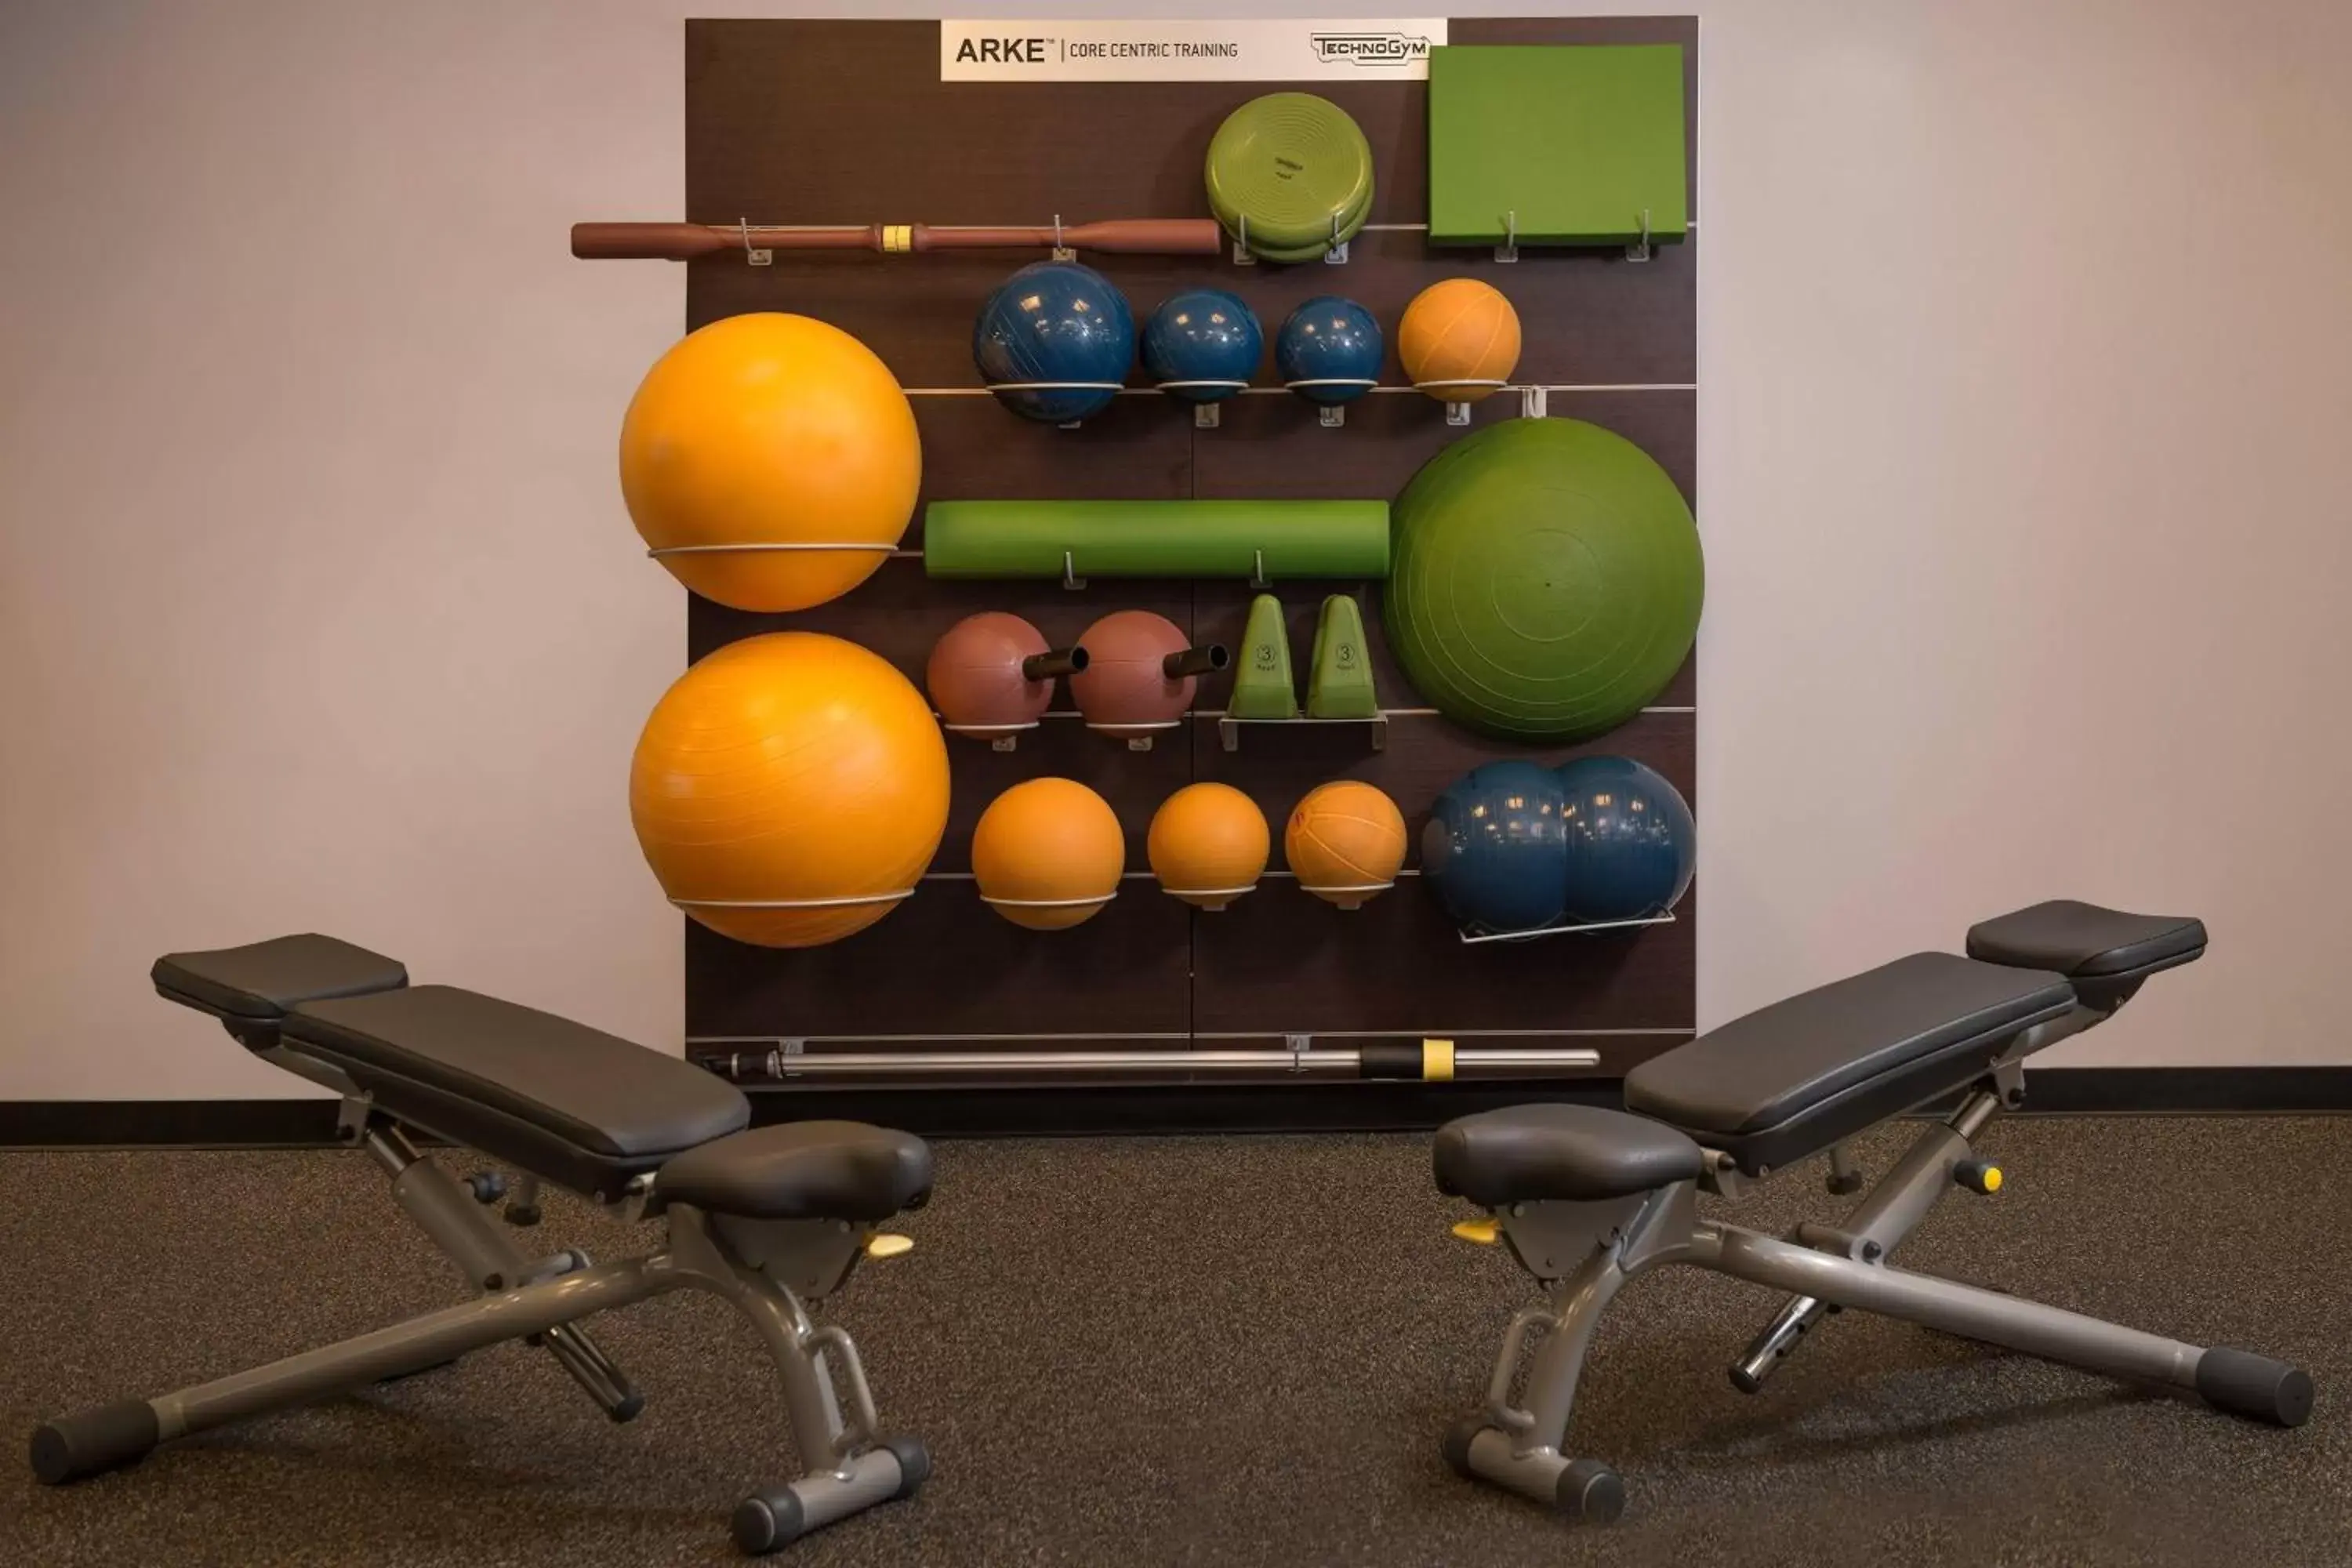 Fitness centre/facilities, Fitness Center/Facilities in Baltimore Marriott Waterfront